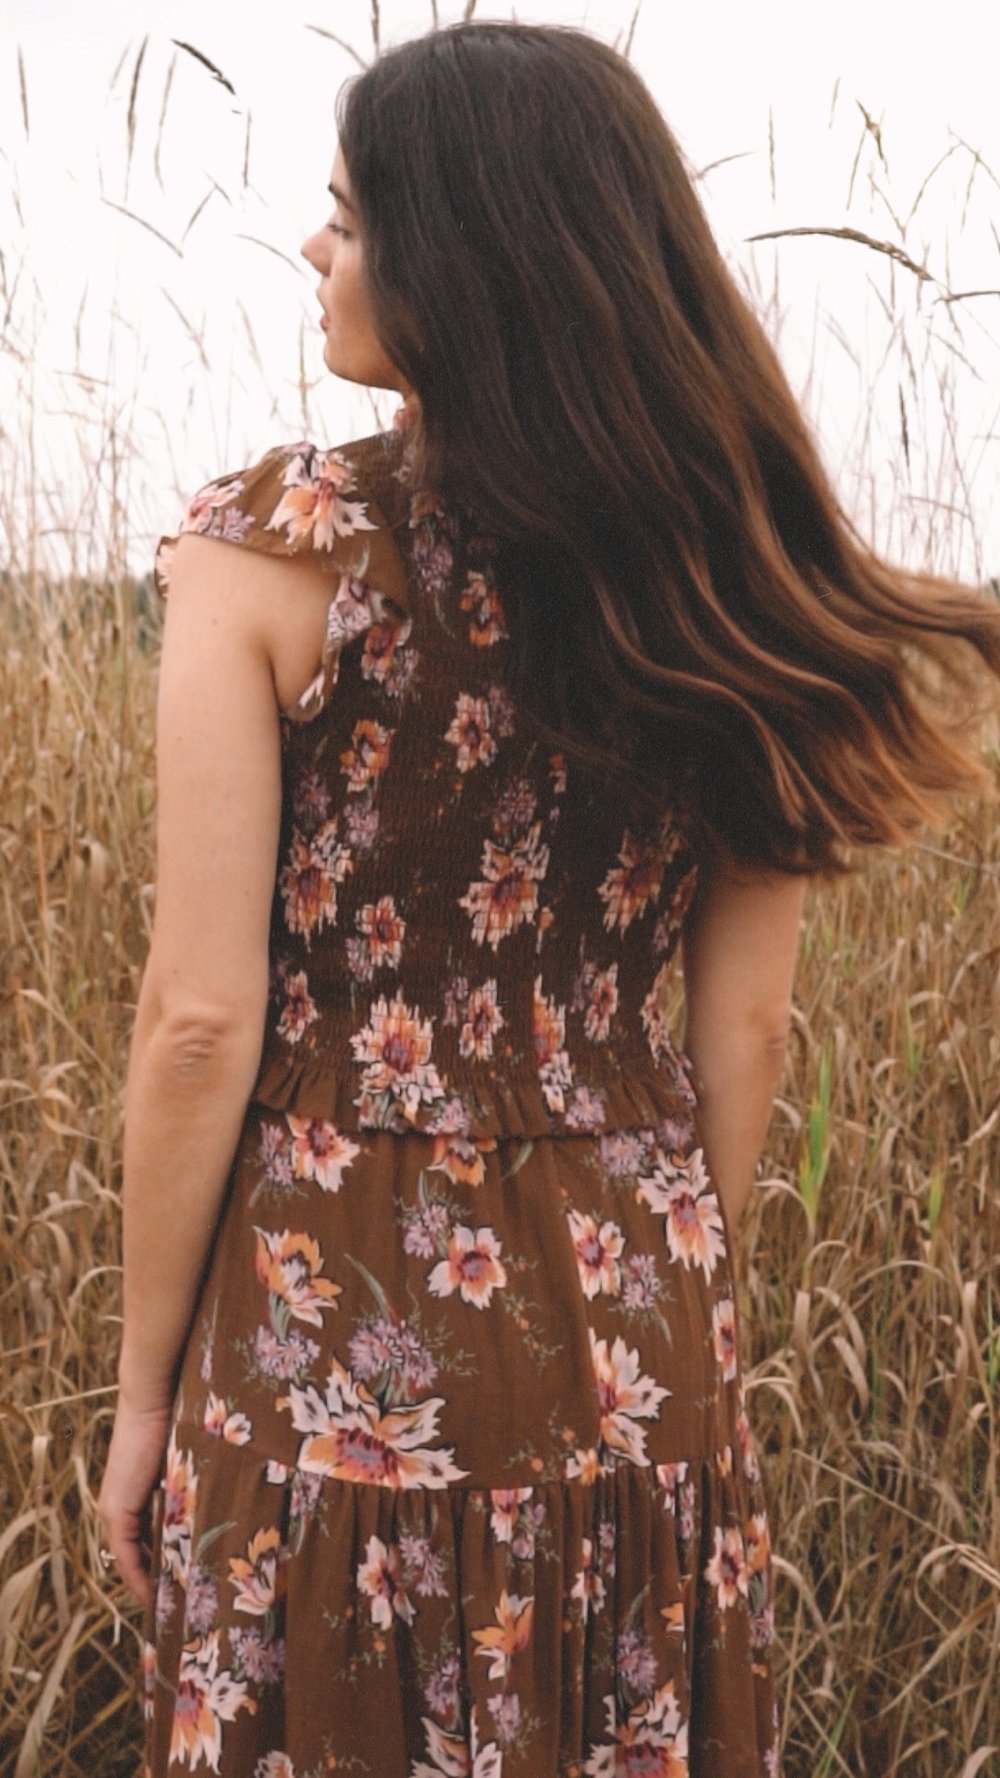 Sarah Butler of @sarahchristine wearing Brown Floral Fall Midi Dress in autumn field -3.jpg